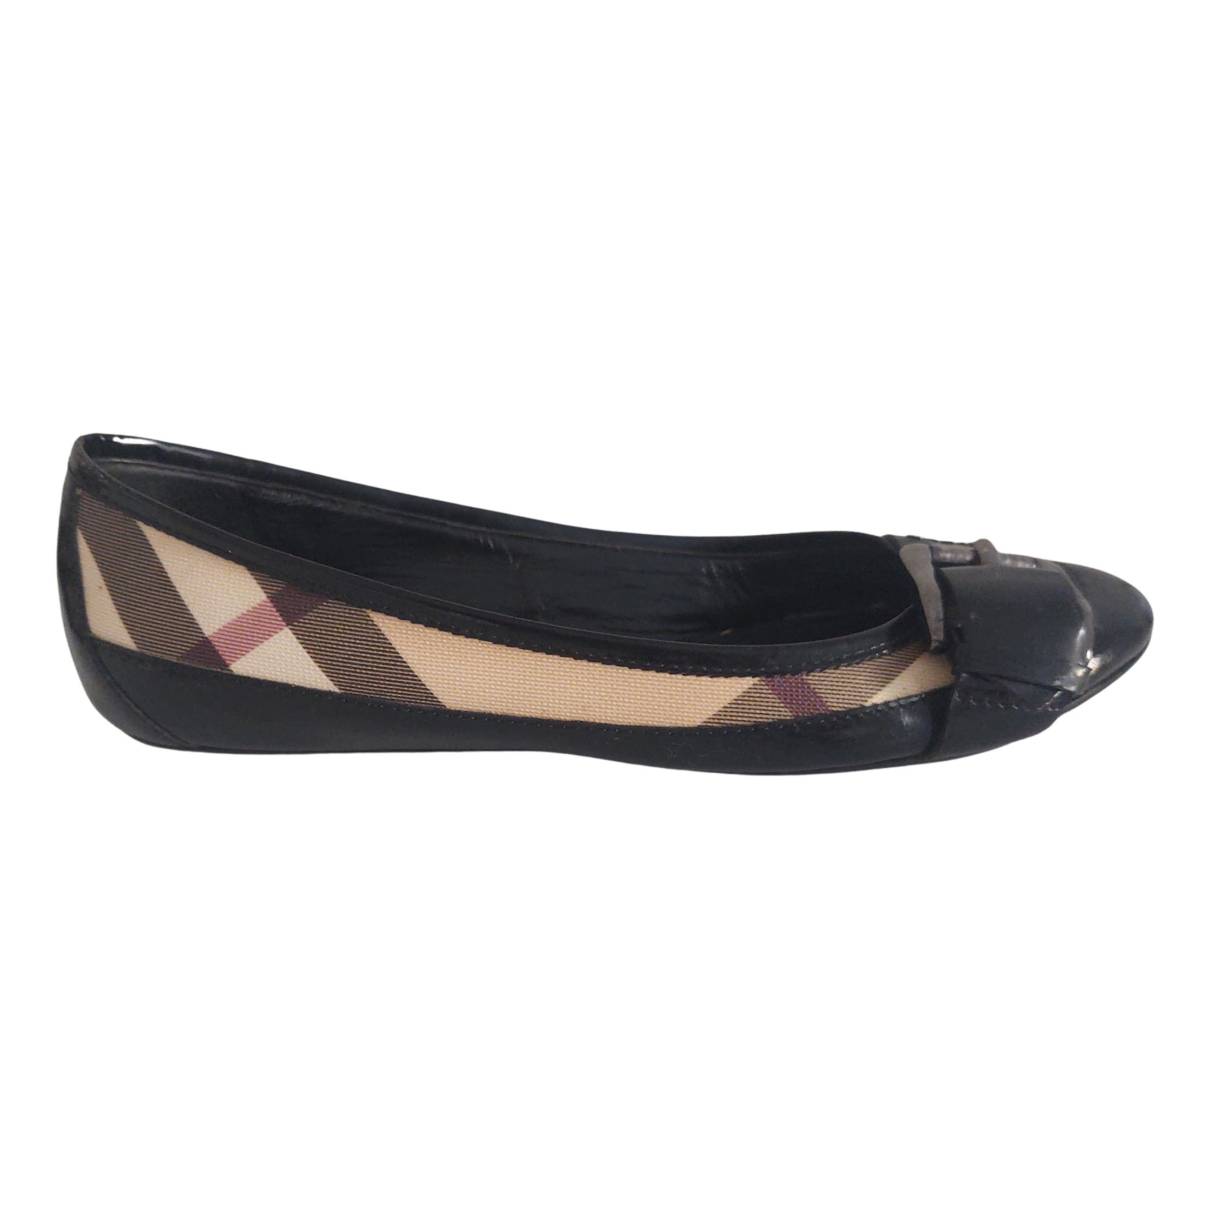 Patent leather flat Burberry